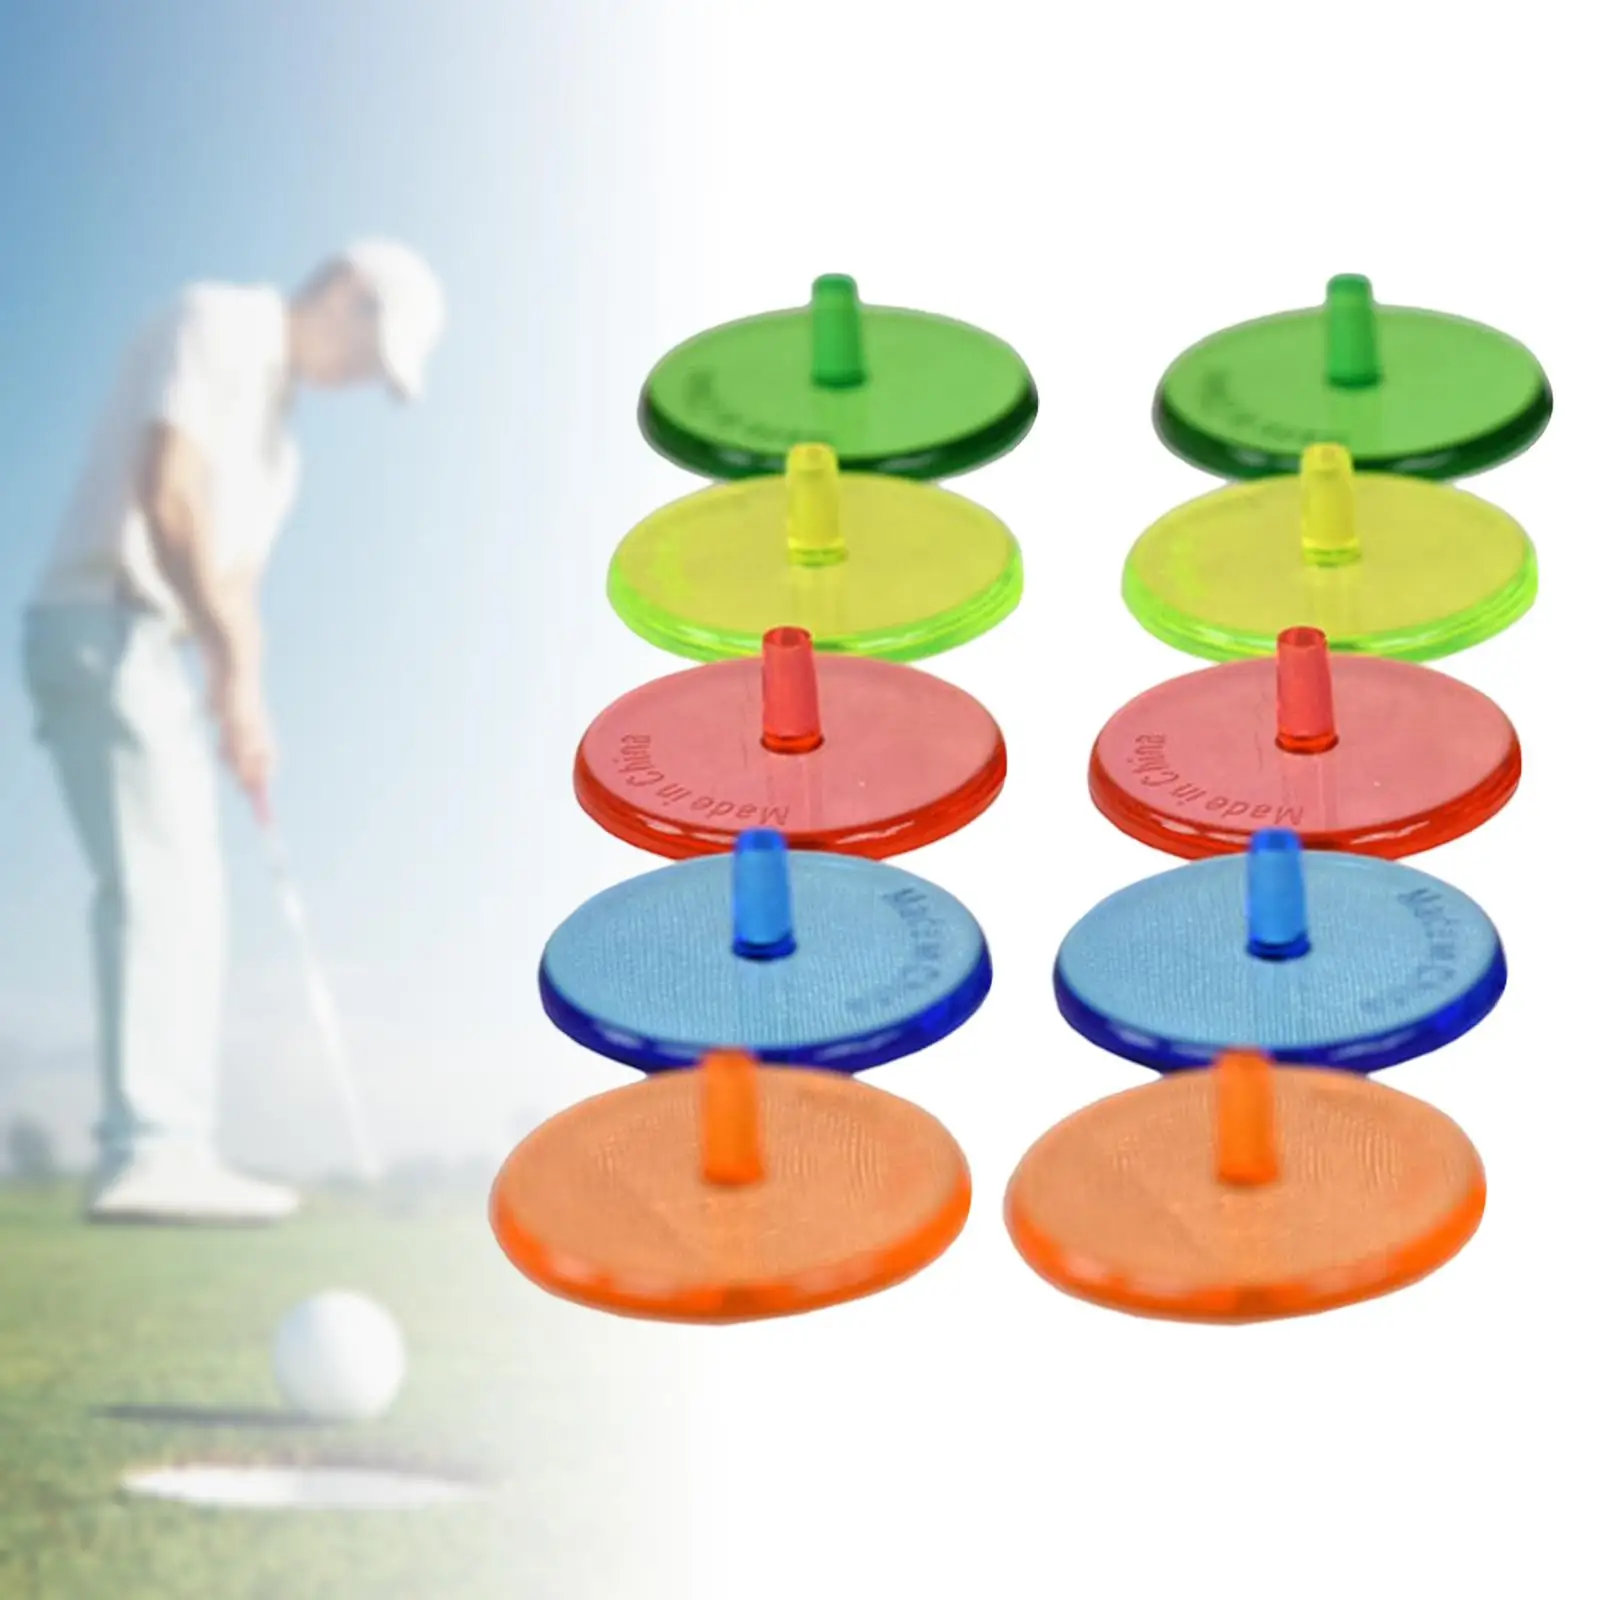 10x Golf Ball Markers  Gift Position  Accessories Base Multicolor 24mm for Training Unisex Practice Outdoor